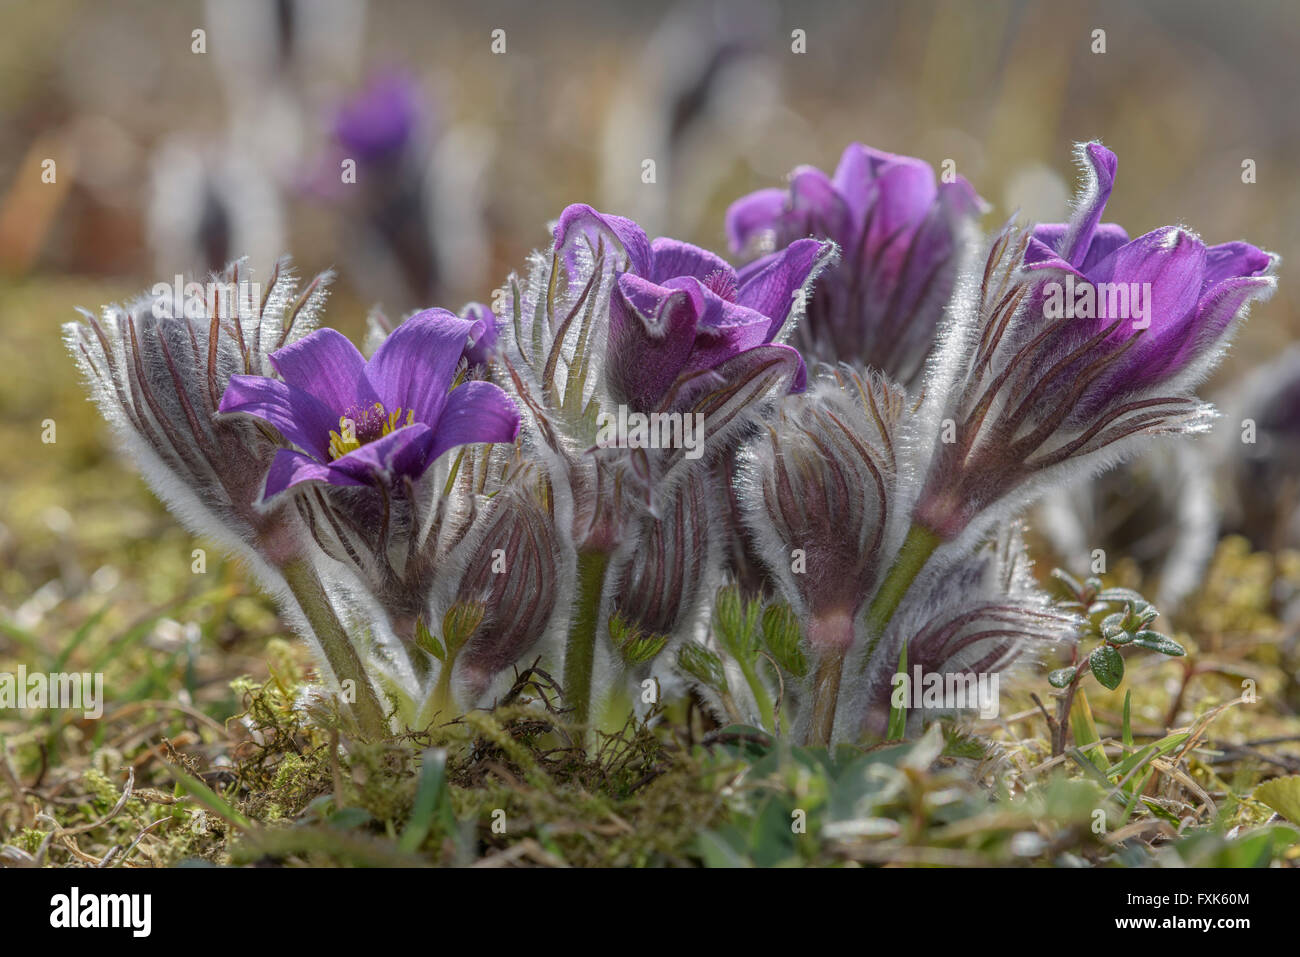 Common pasque flower (pulsatilla vulgaris), several flowers and buds in backlight, Biosphere Reserve Swabian Alb Stock Photo